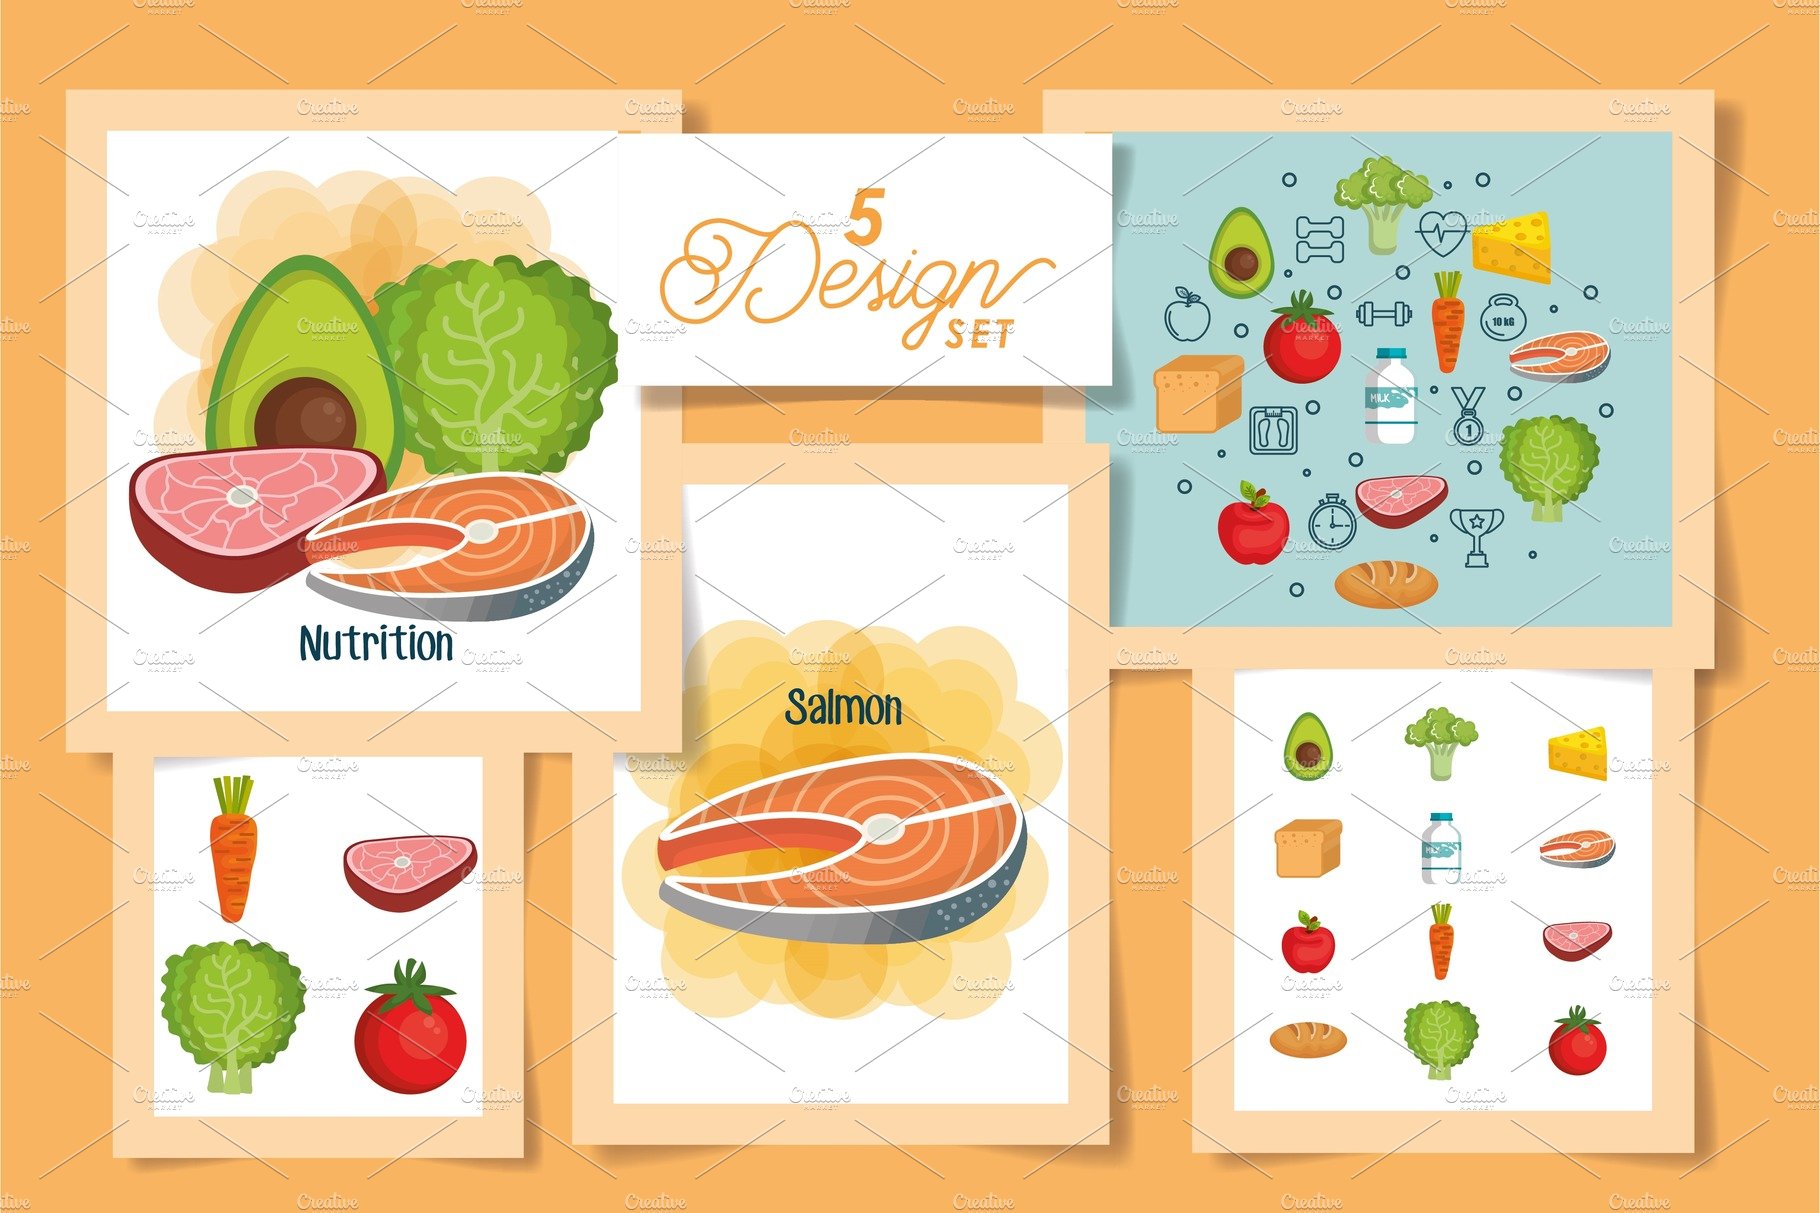 five designs of healhty food icons cover image.